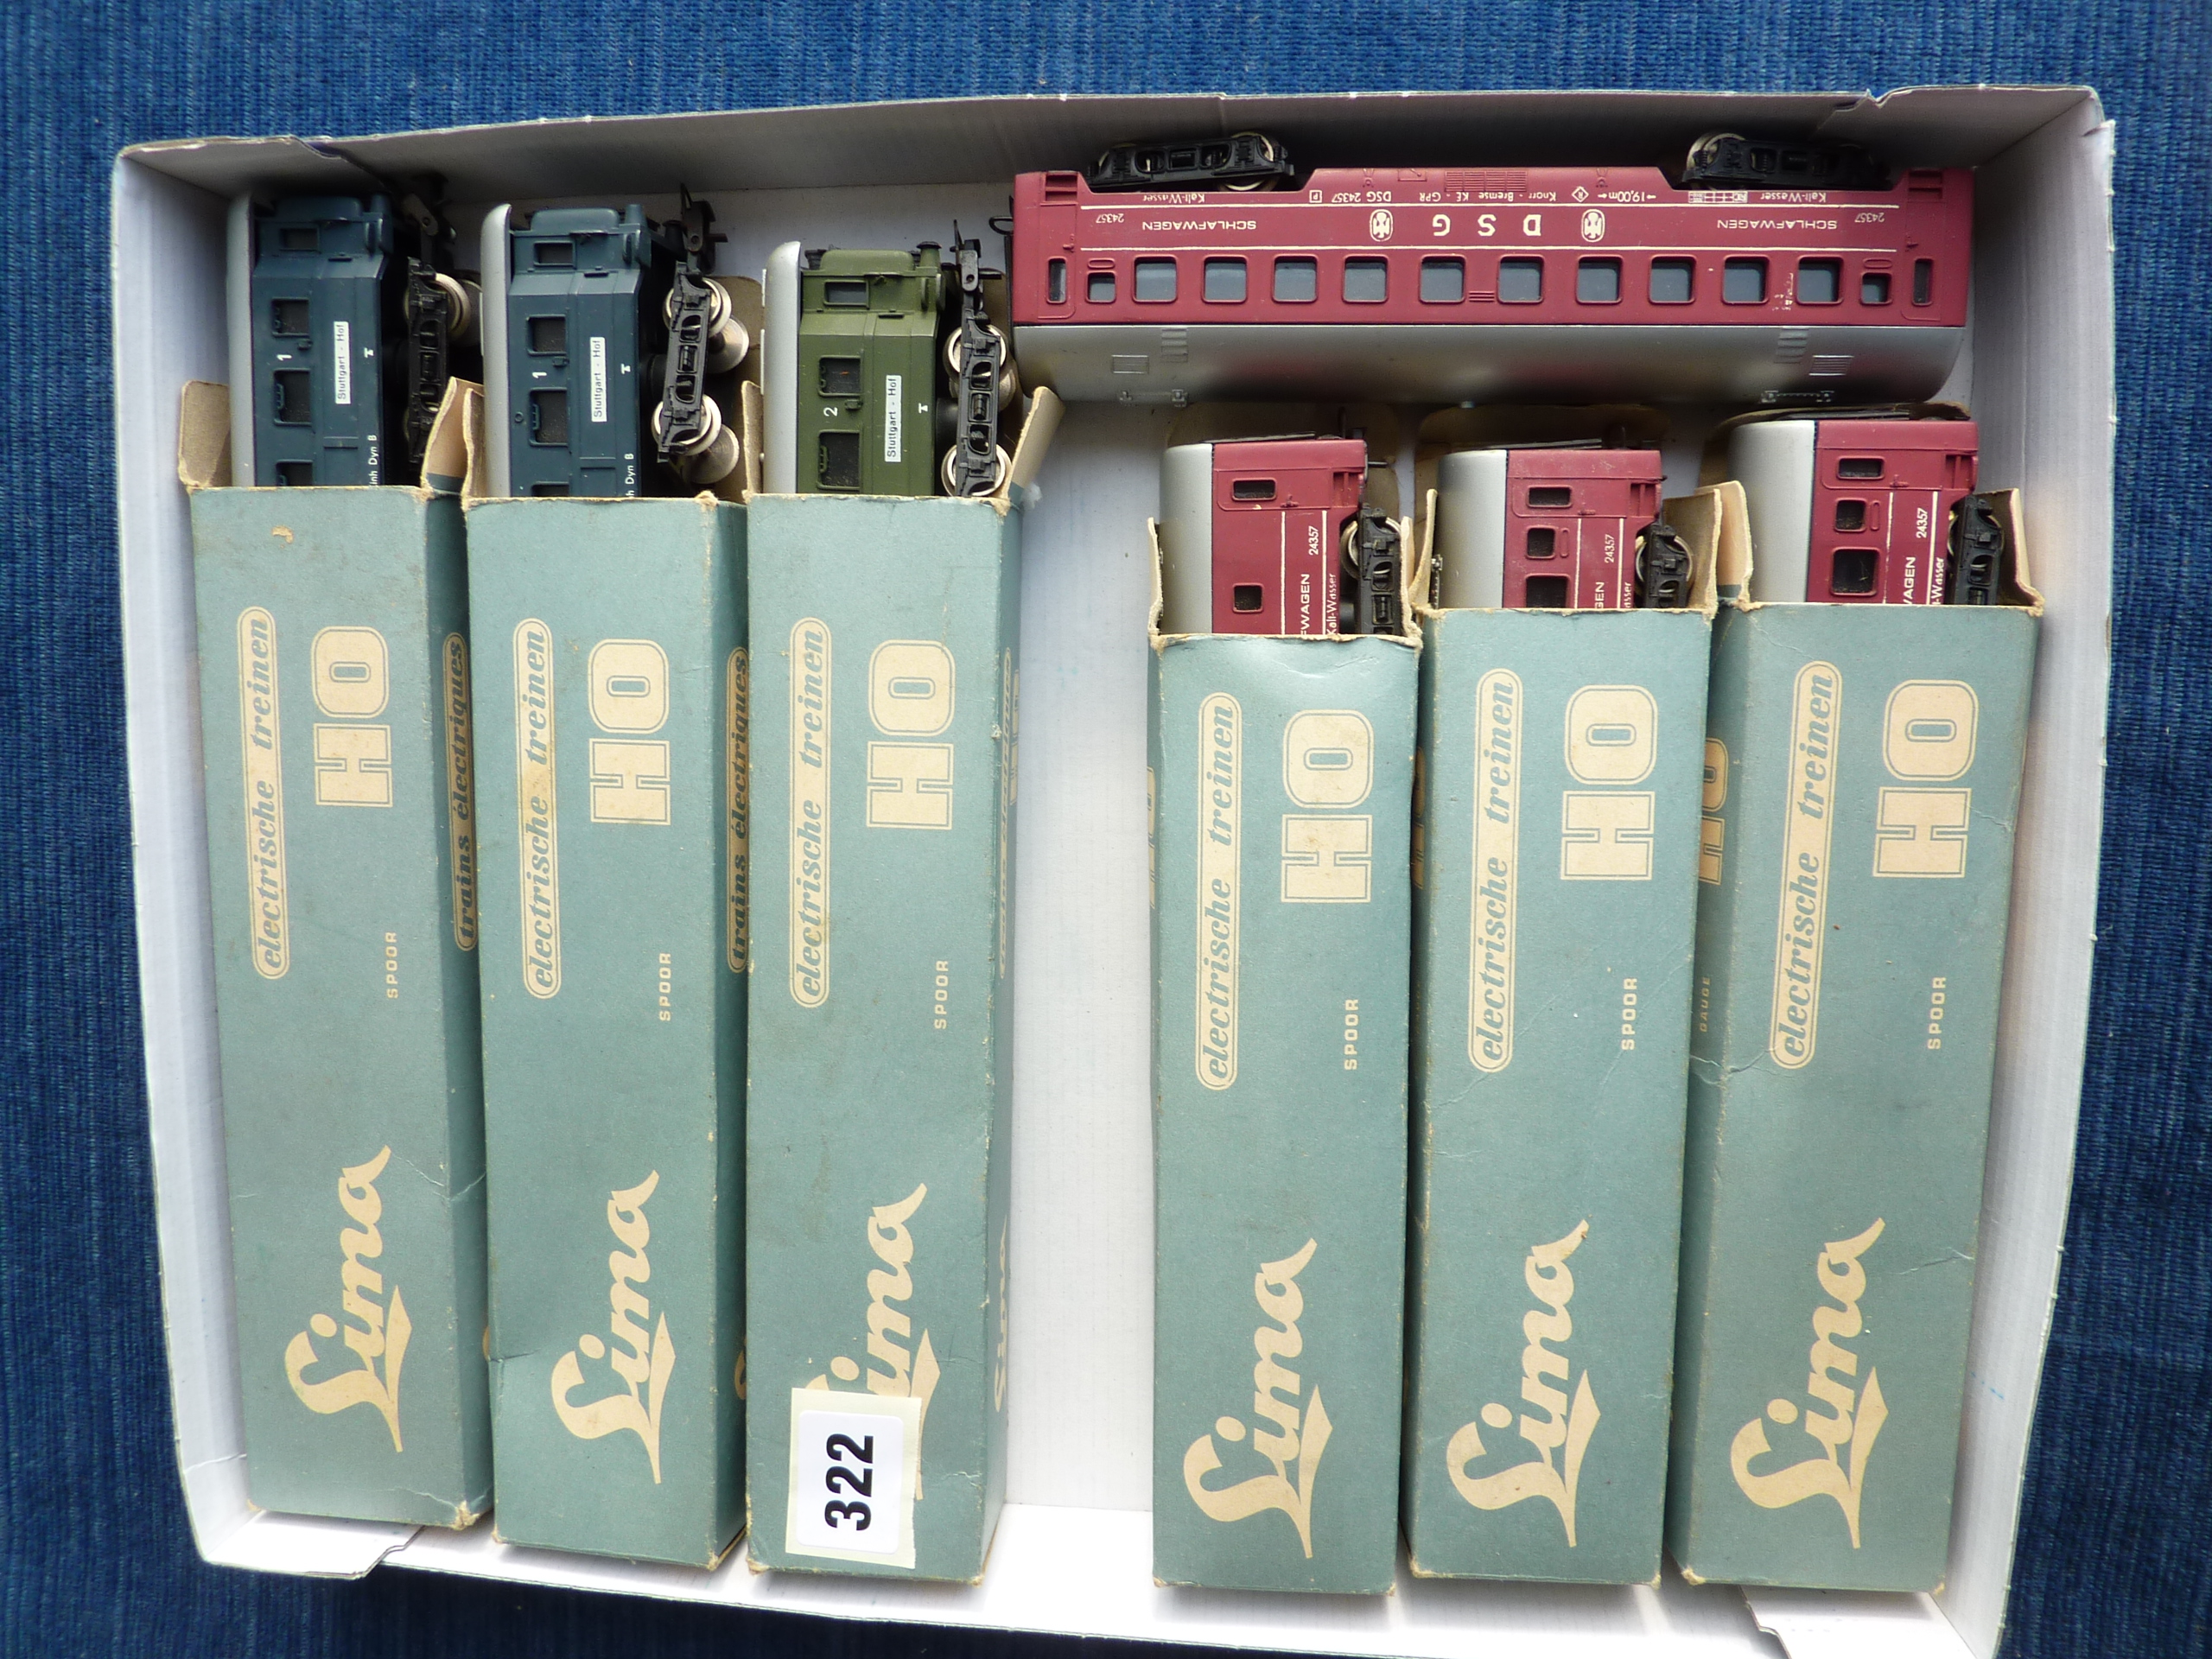 6 EARLY PRODUCTION LIMA HO SCALE MODEL RAILWAY COACHES : 4 X 24357 DSG SCHLAFWAGEN ( 3 BOXED), 3